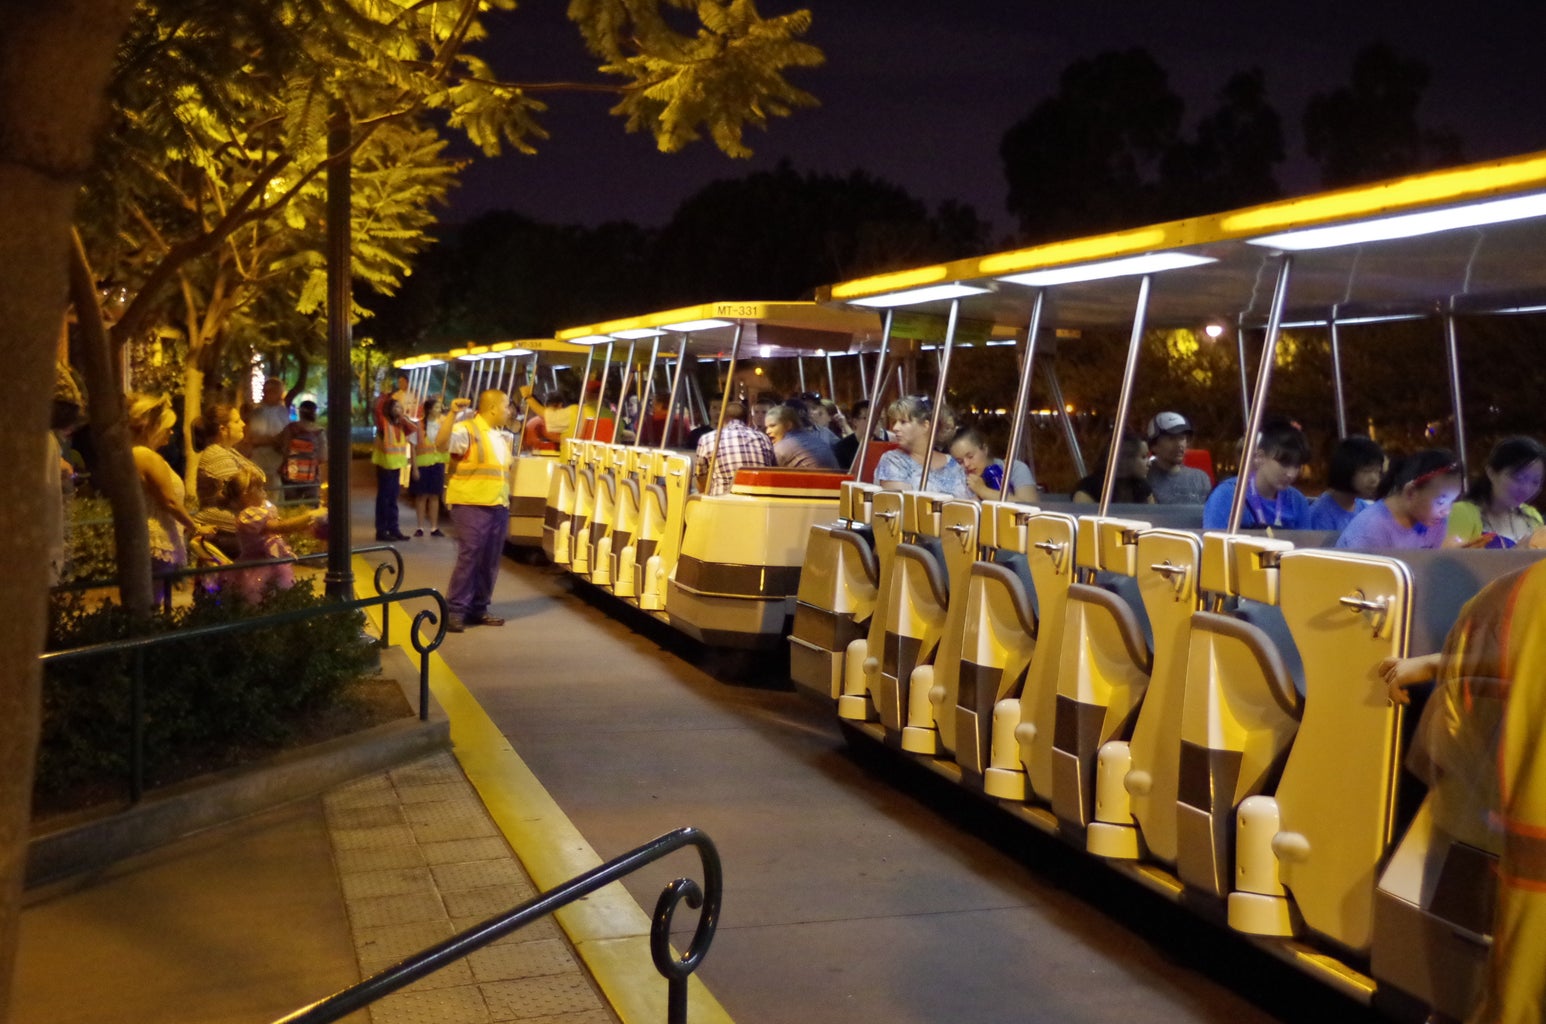 It is the Disney tram picking up people at night